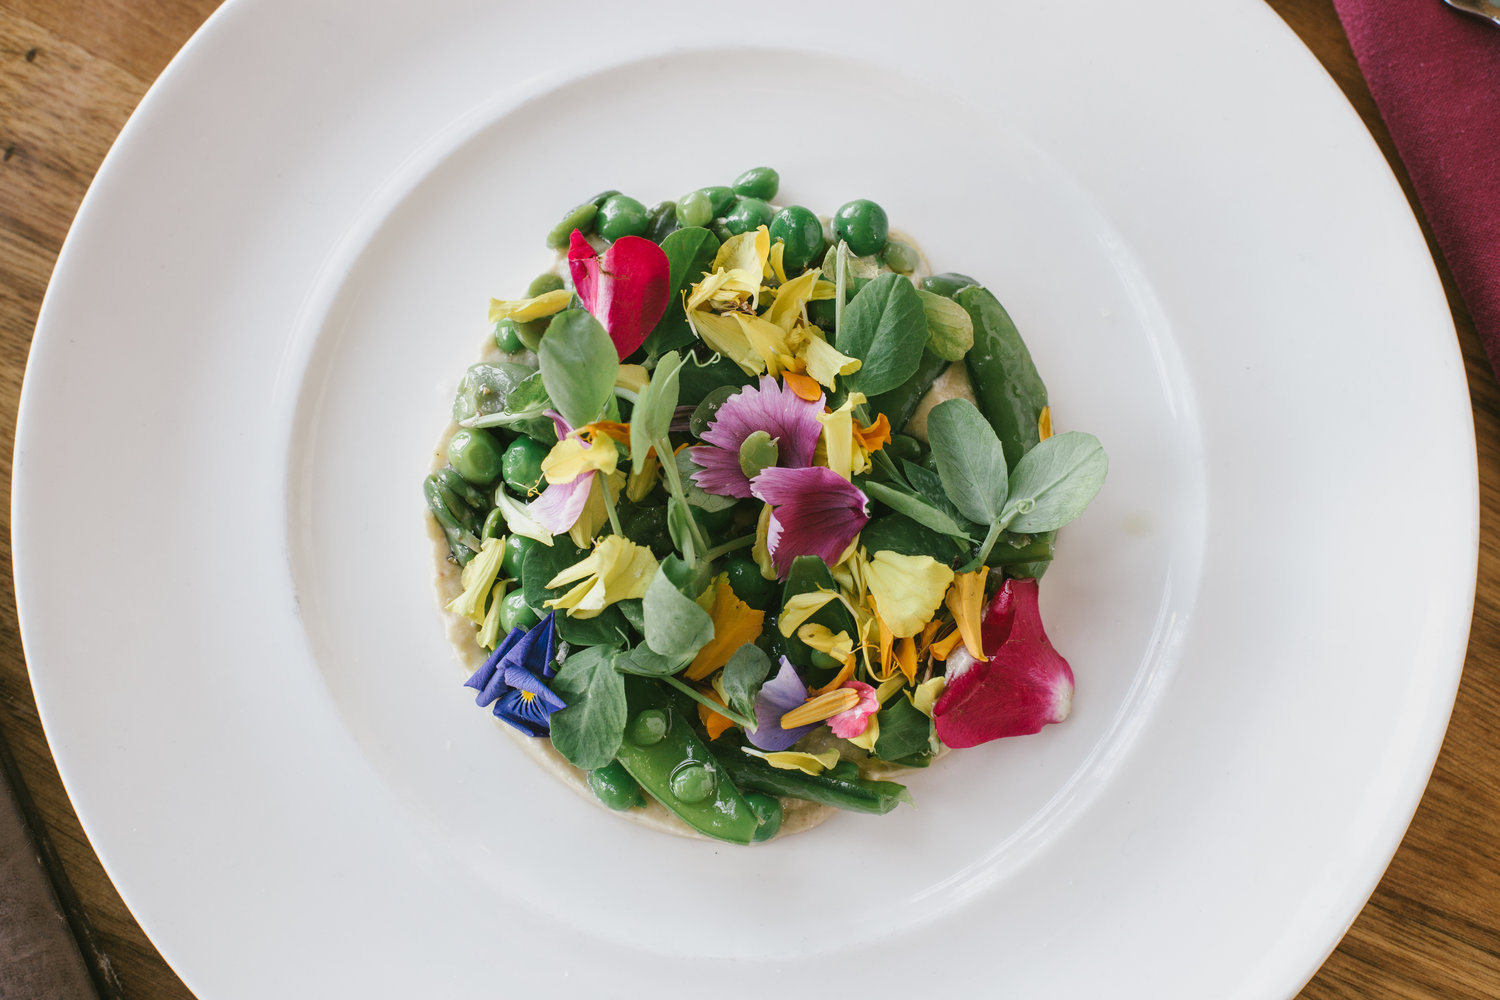 The spring pea crudité with fava beans, summer squash and sunflower baba ghanoush.